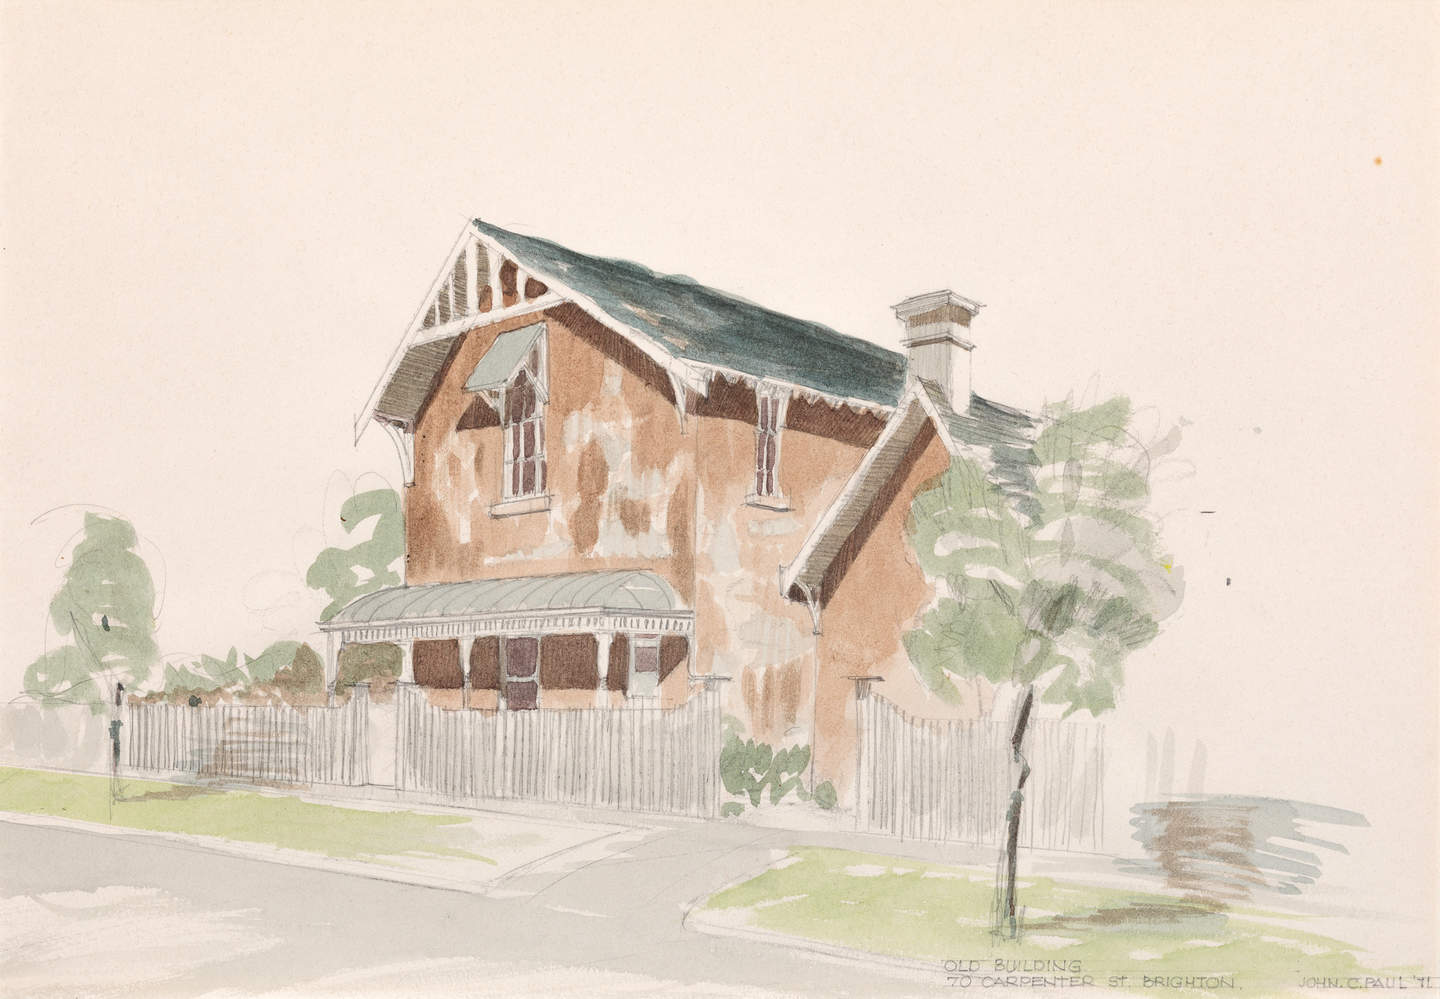 Watercolour of a double story, gabled, brown building with white picket fence.